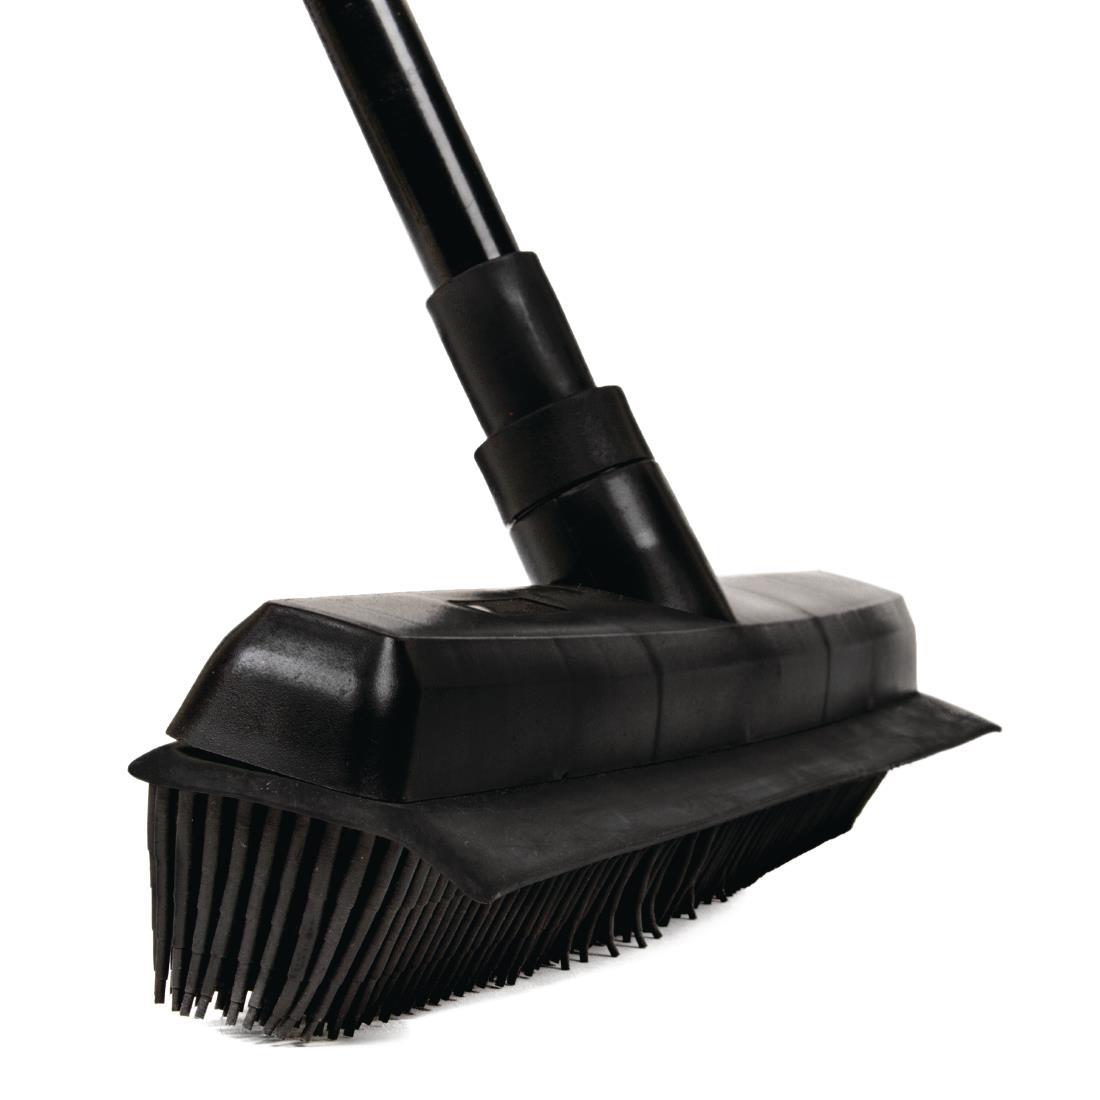 Jantex Clean Sweep Rubber Broom and Telescopic Handle - F704  - 2